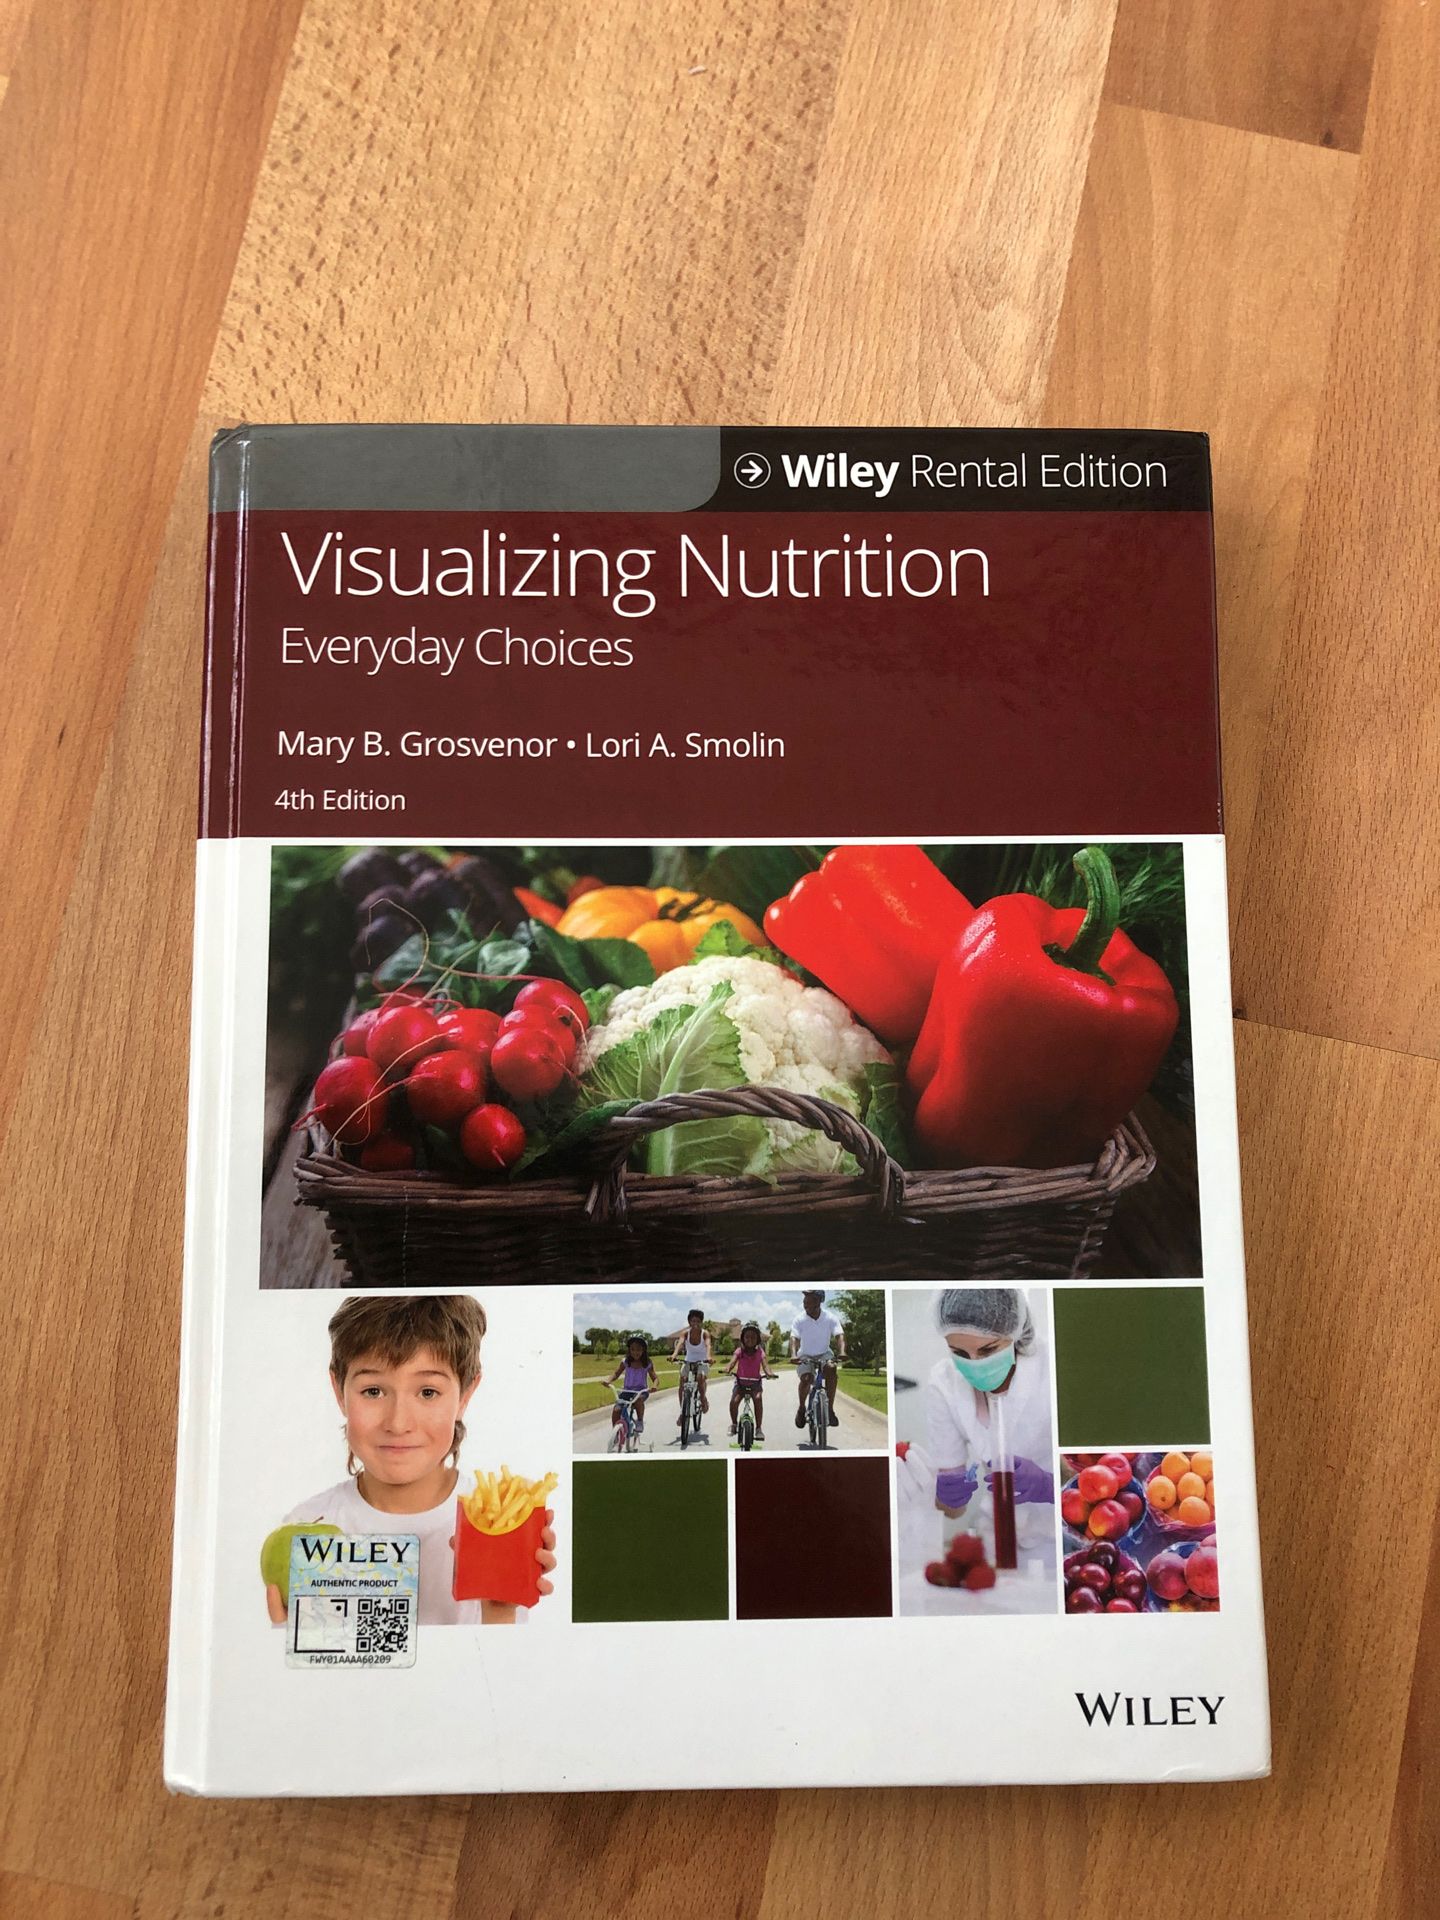 Visualizing Nutrition (Wiley textbook) ISBN 13 978-1119-39553-9